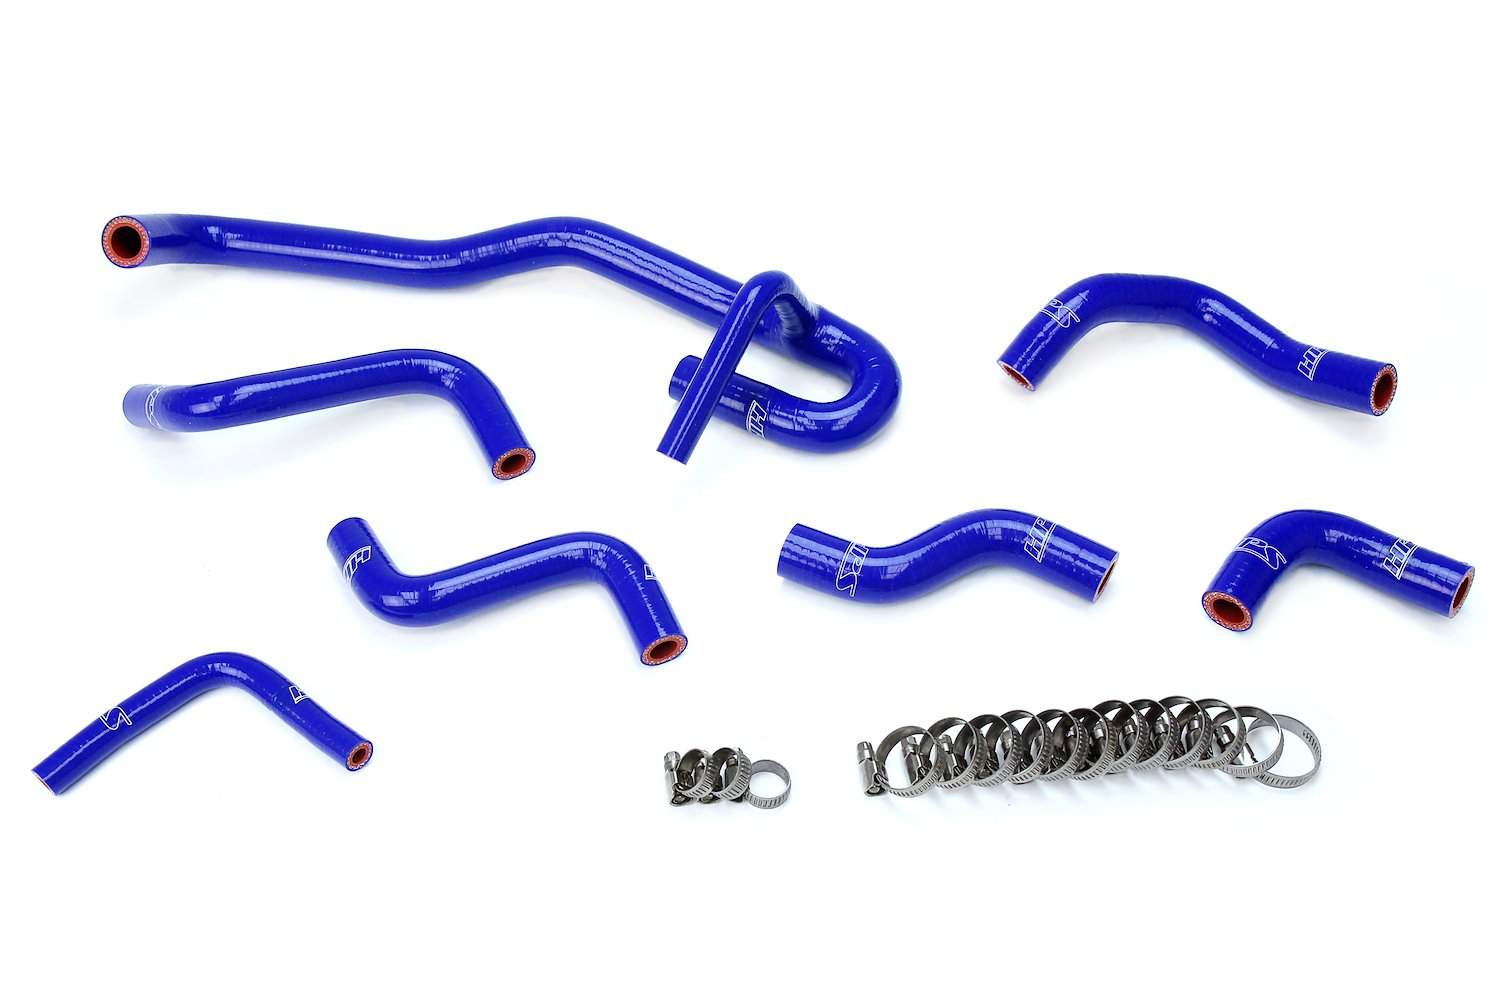 57-2190-BLUE Heater Hose Kit, 3-Ply Reinforced Silicone, Replaces Rubber Heater Coolant Hoses